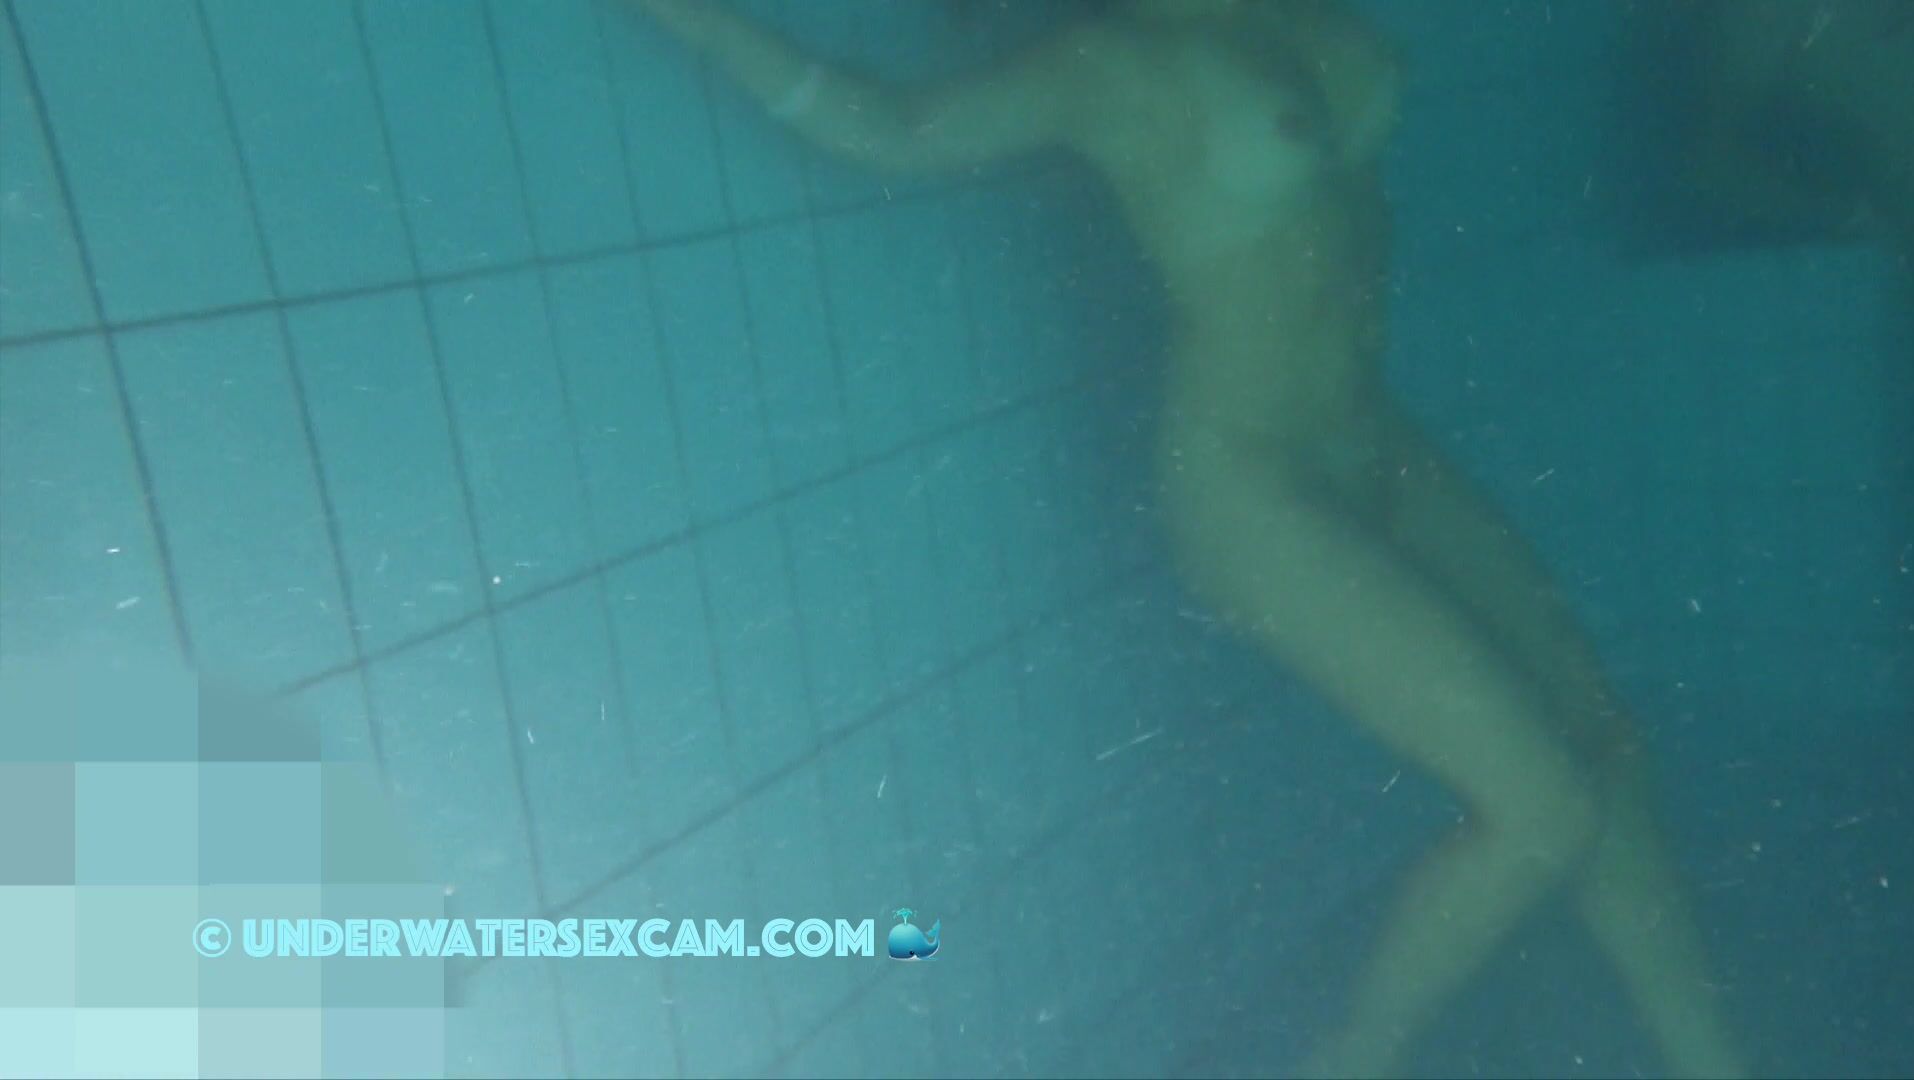 Hot tan lined girl gets neck massage underwater